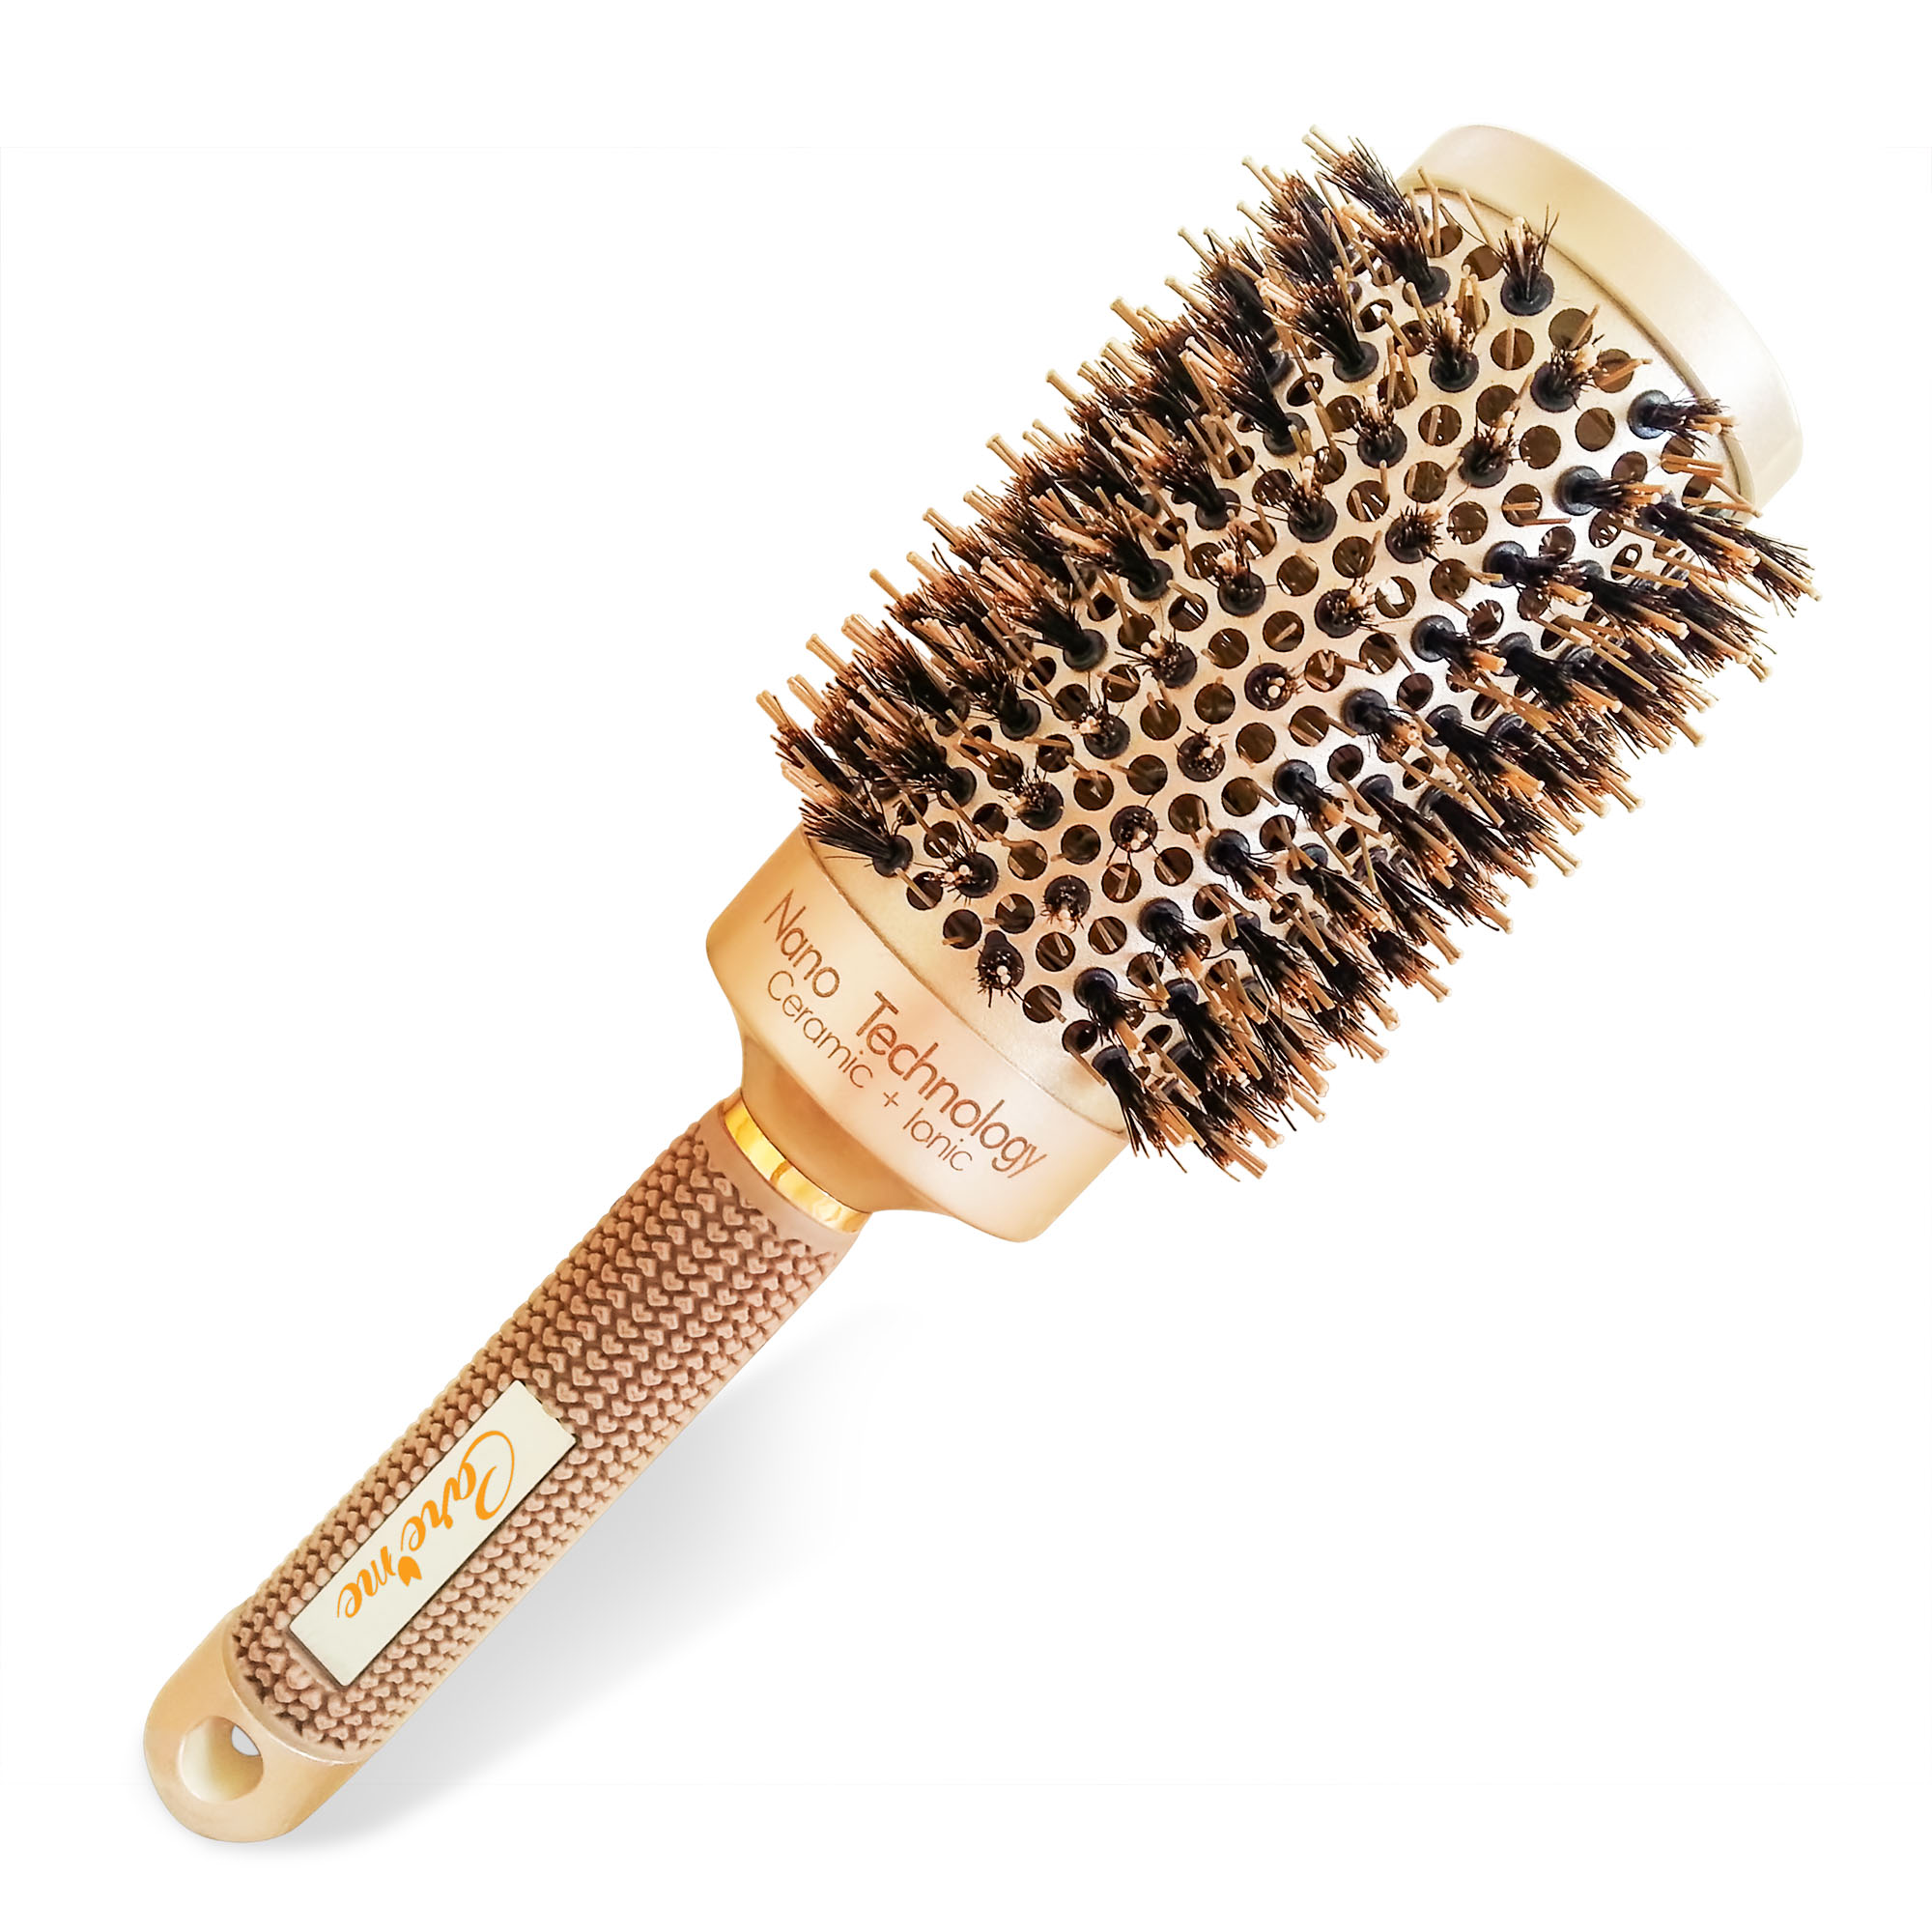 Care Me Blowout Round Hair Brush